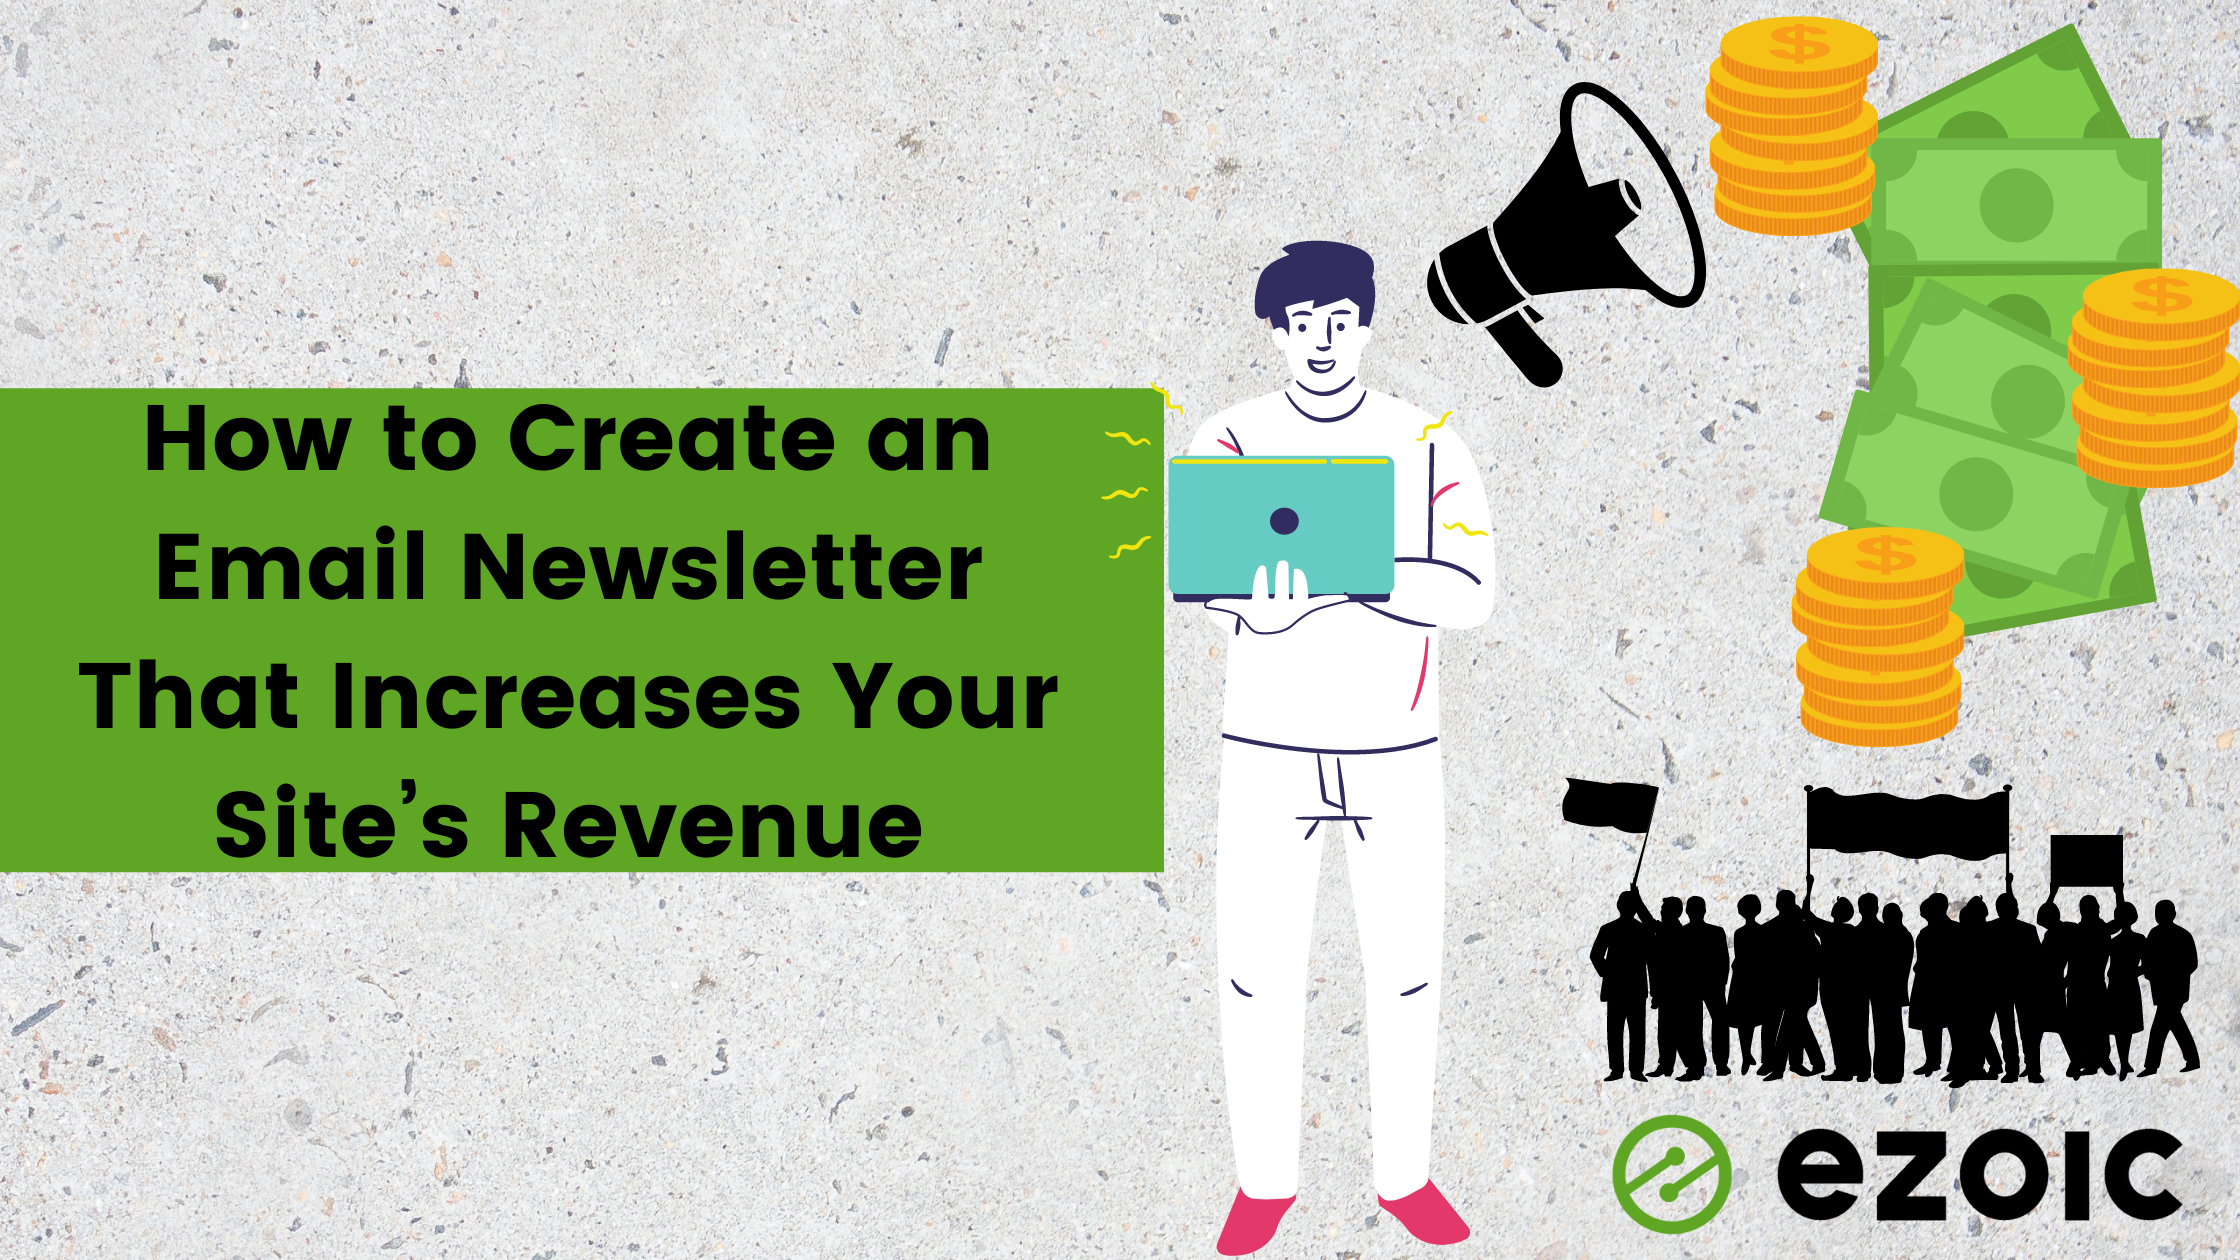 How to Create an Email Newsletter That Increases Your Site’s Revenue